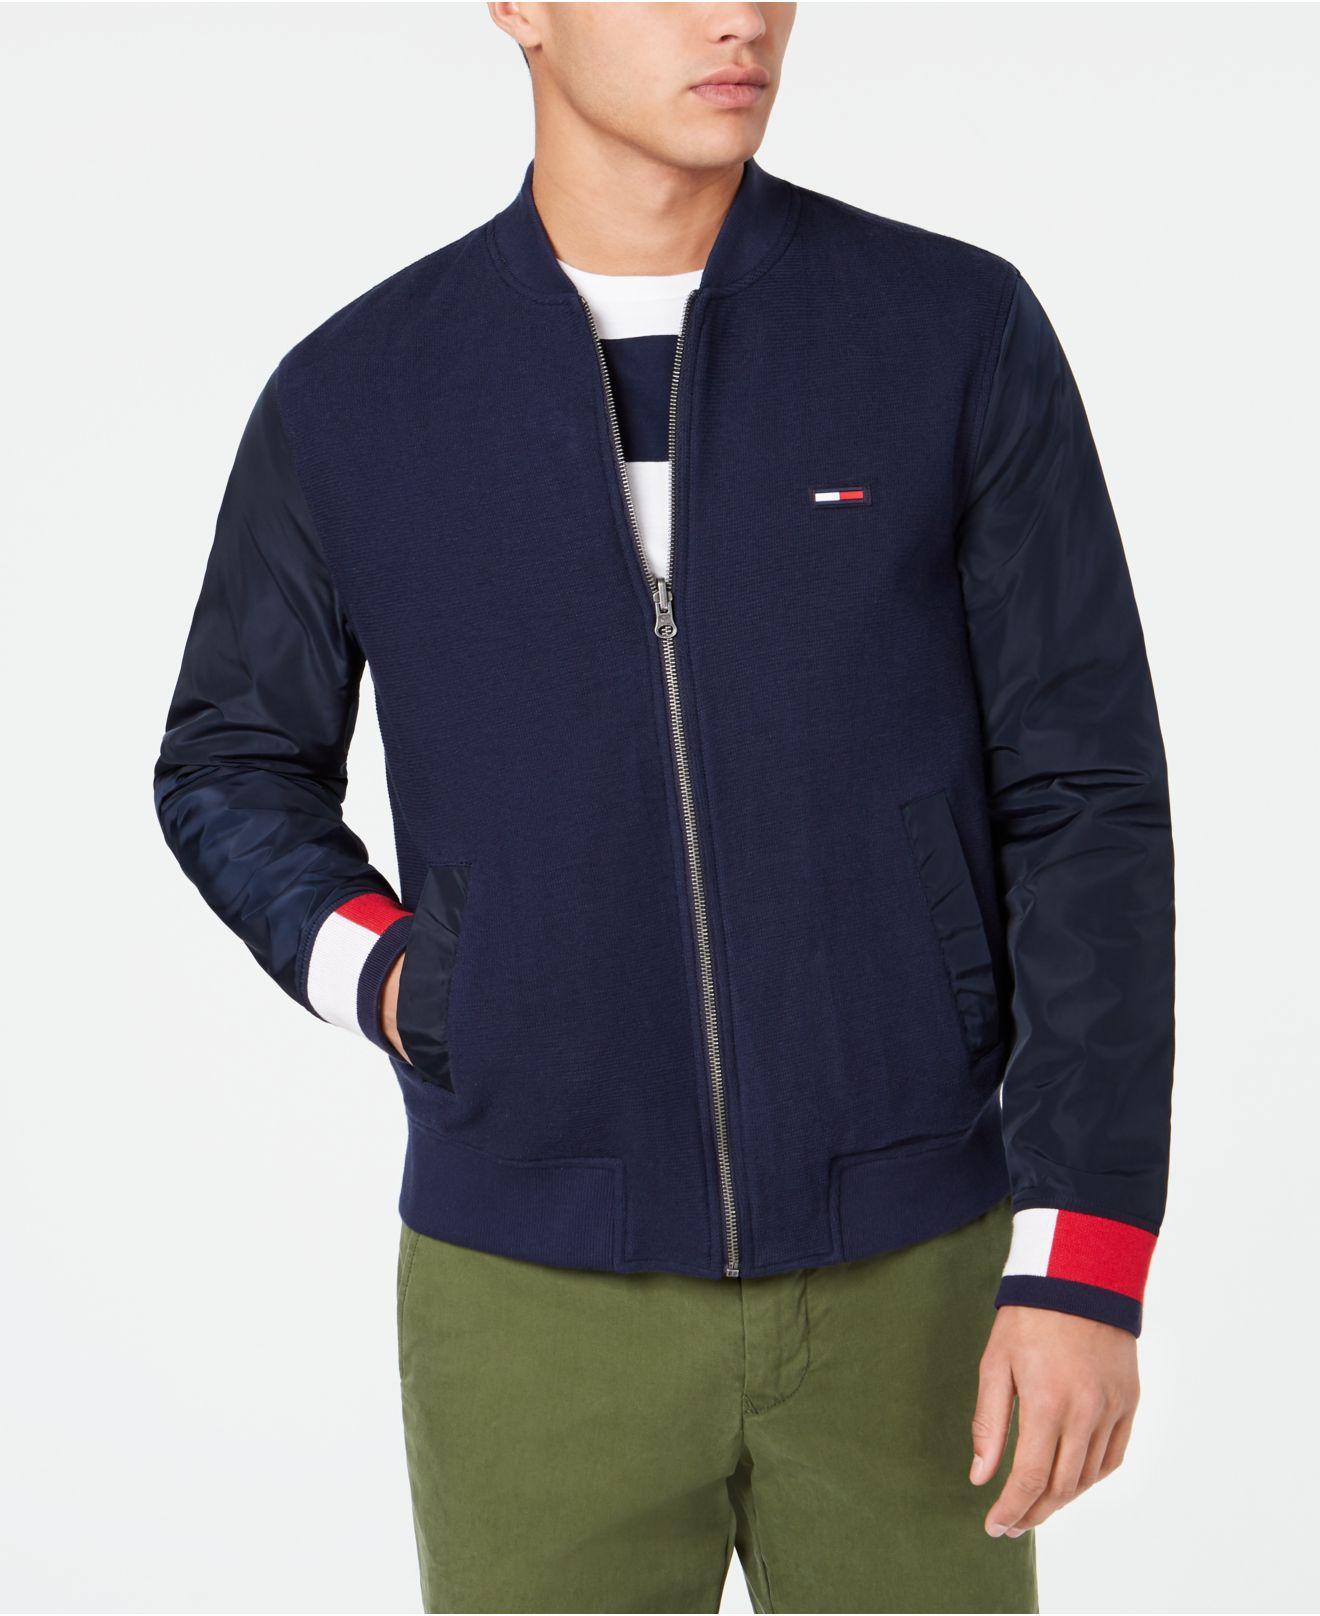 tommy jeans reversible bomber jacket